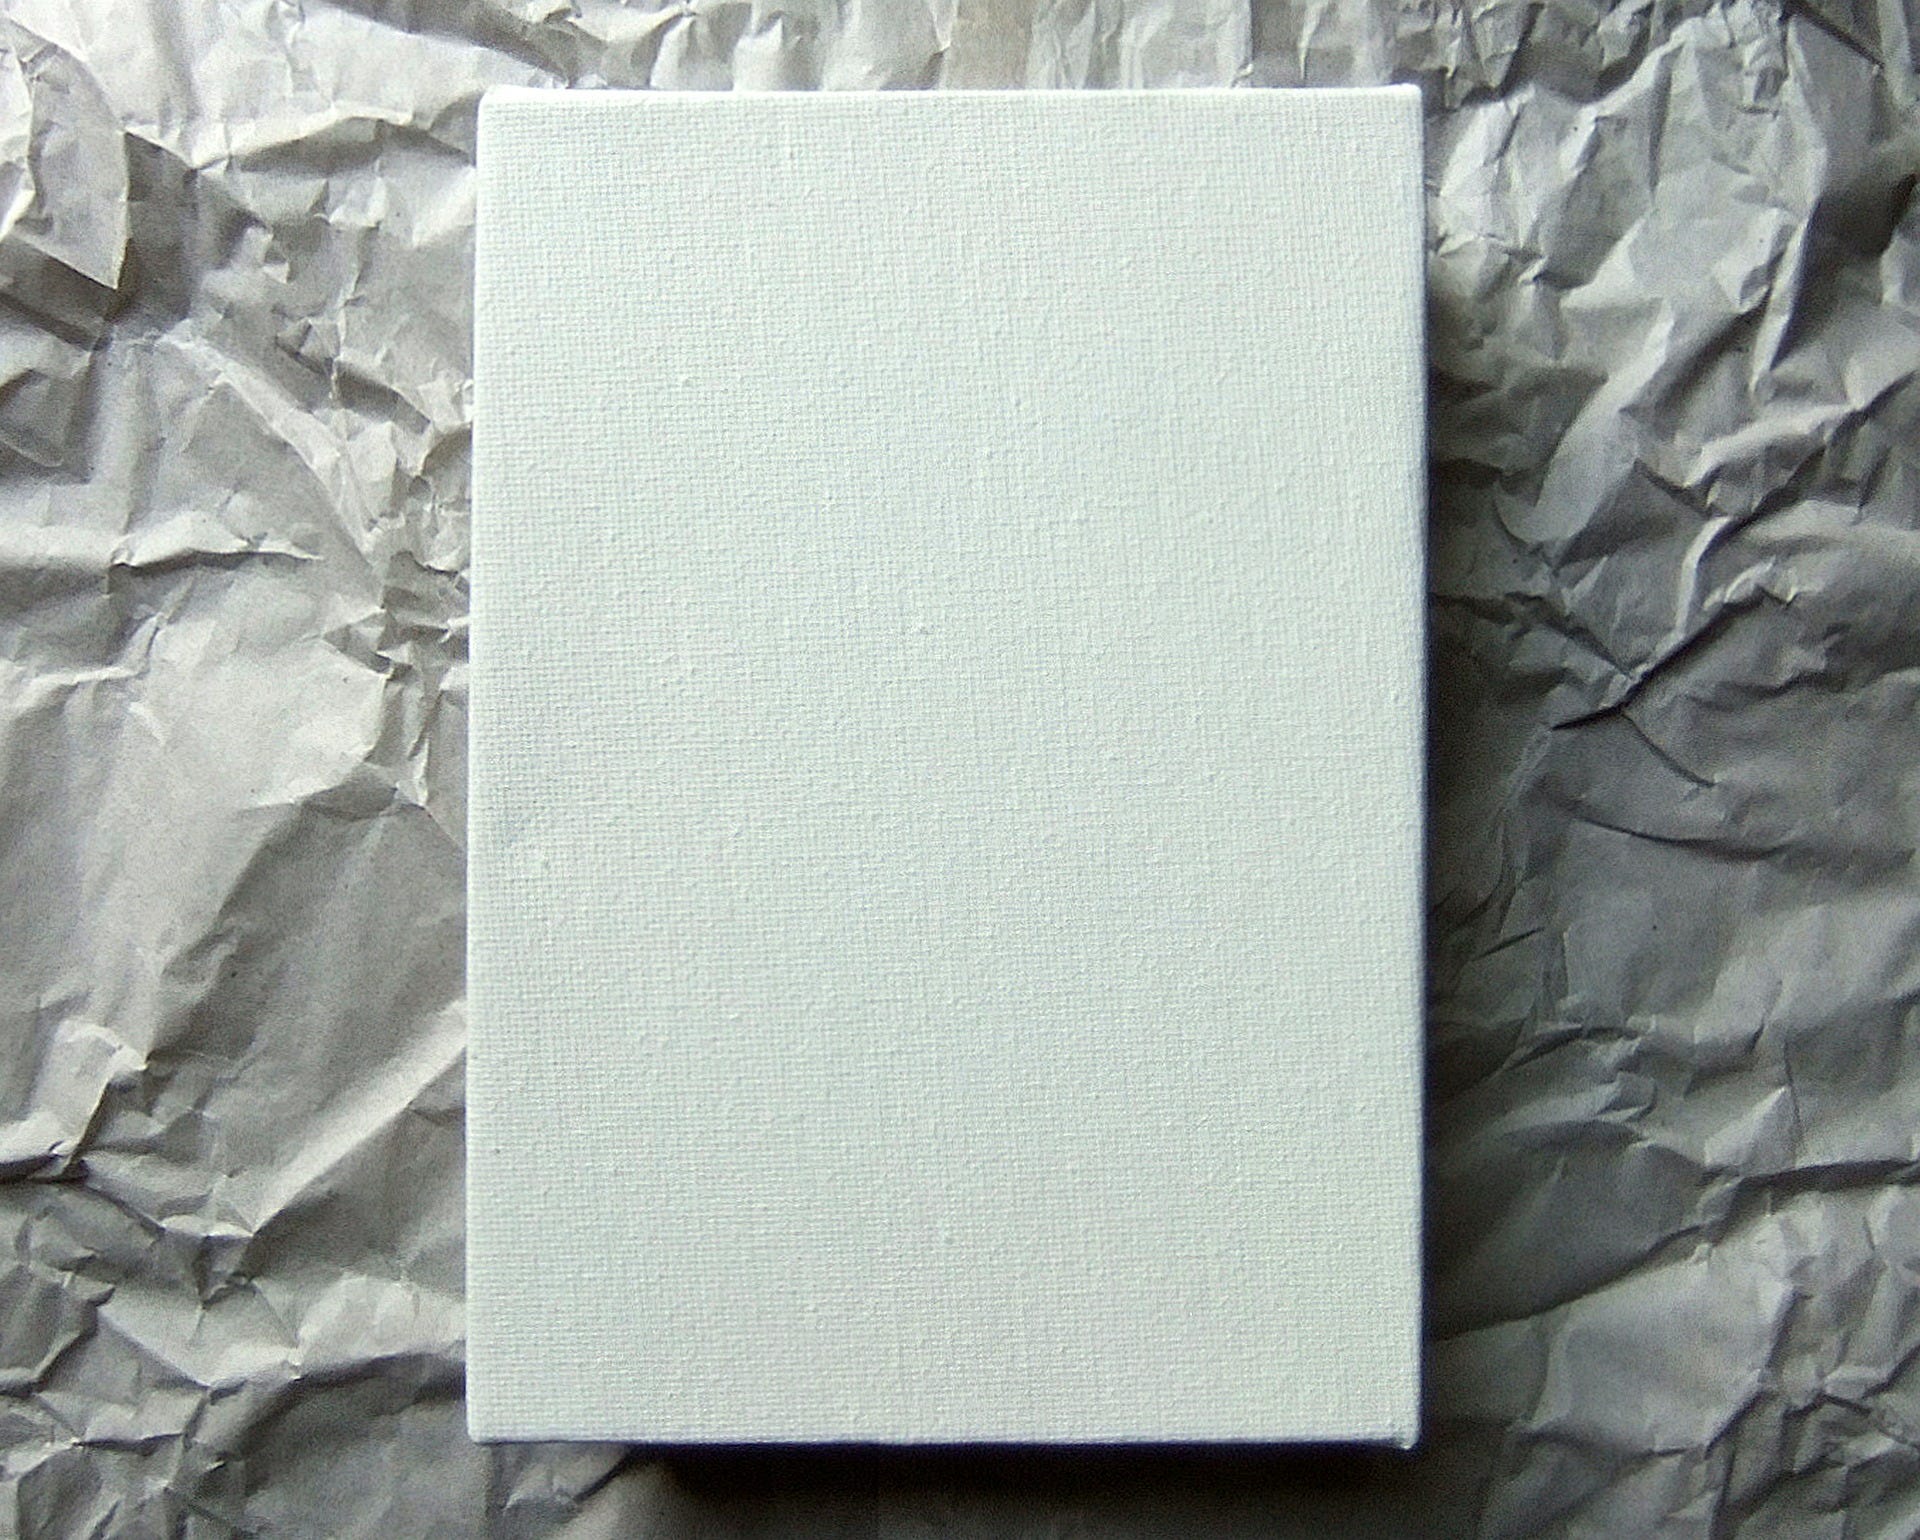 The Blank Canvas Covered in White